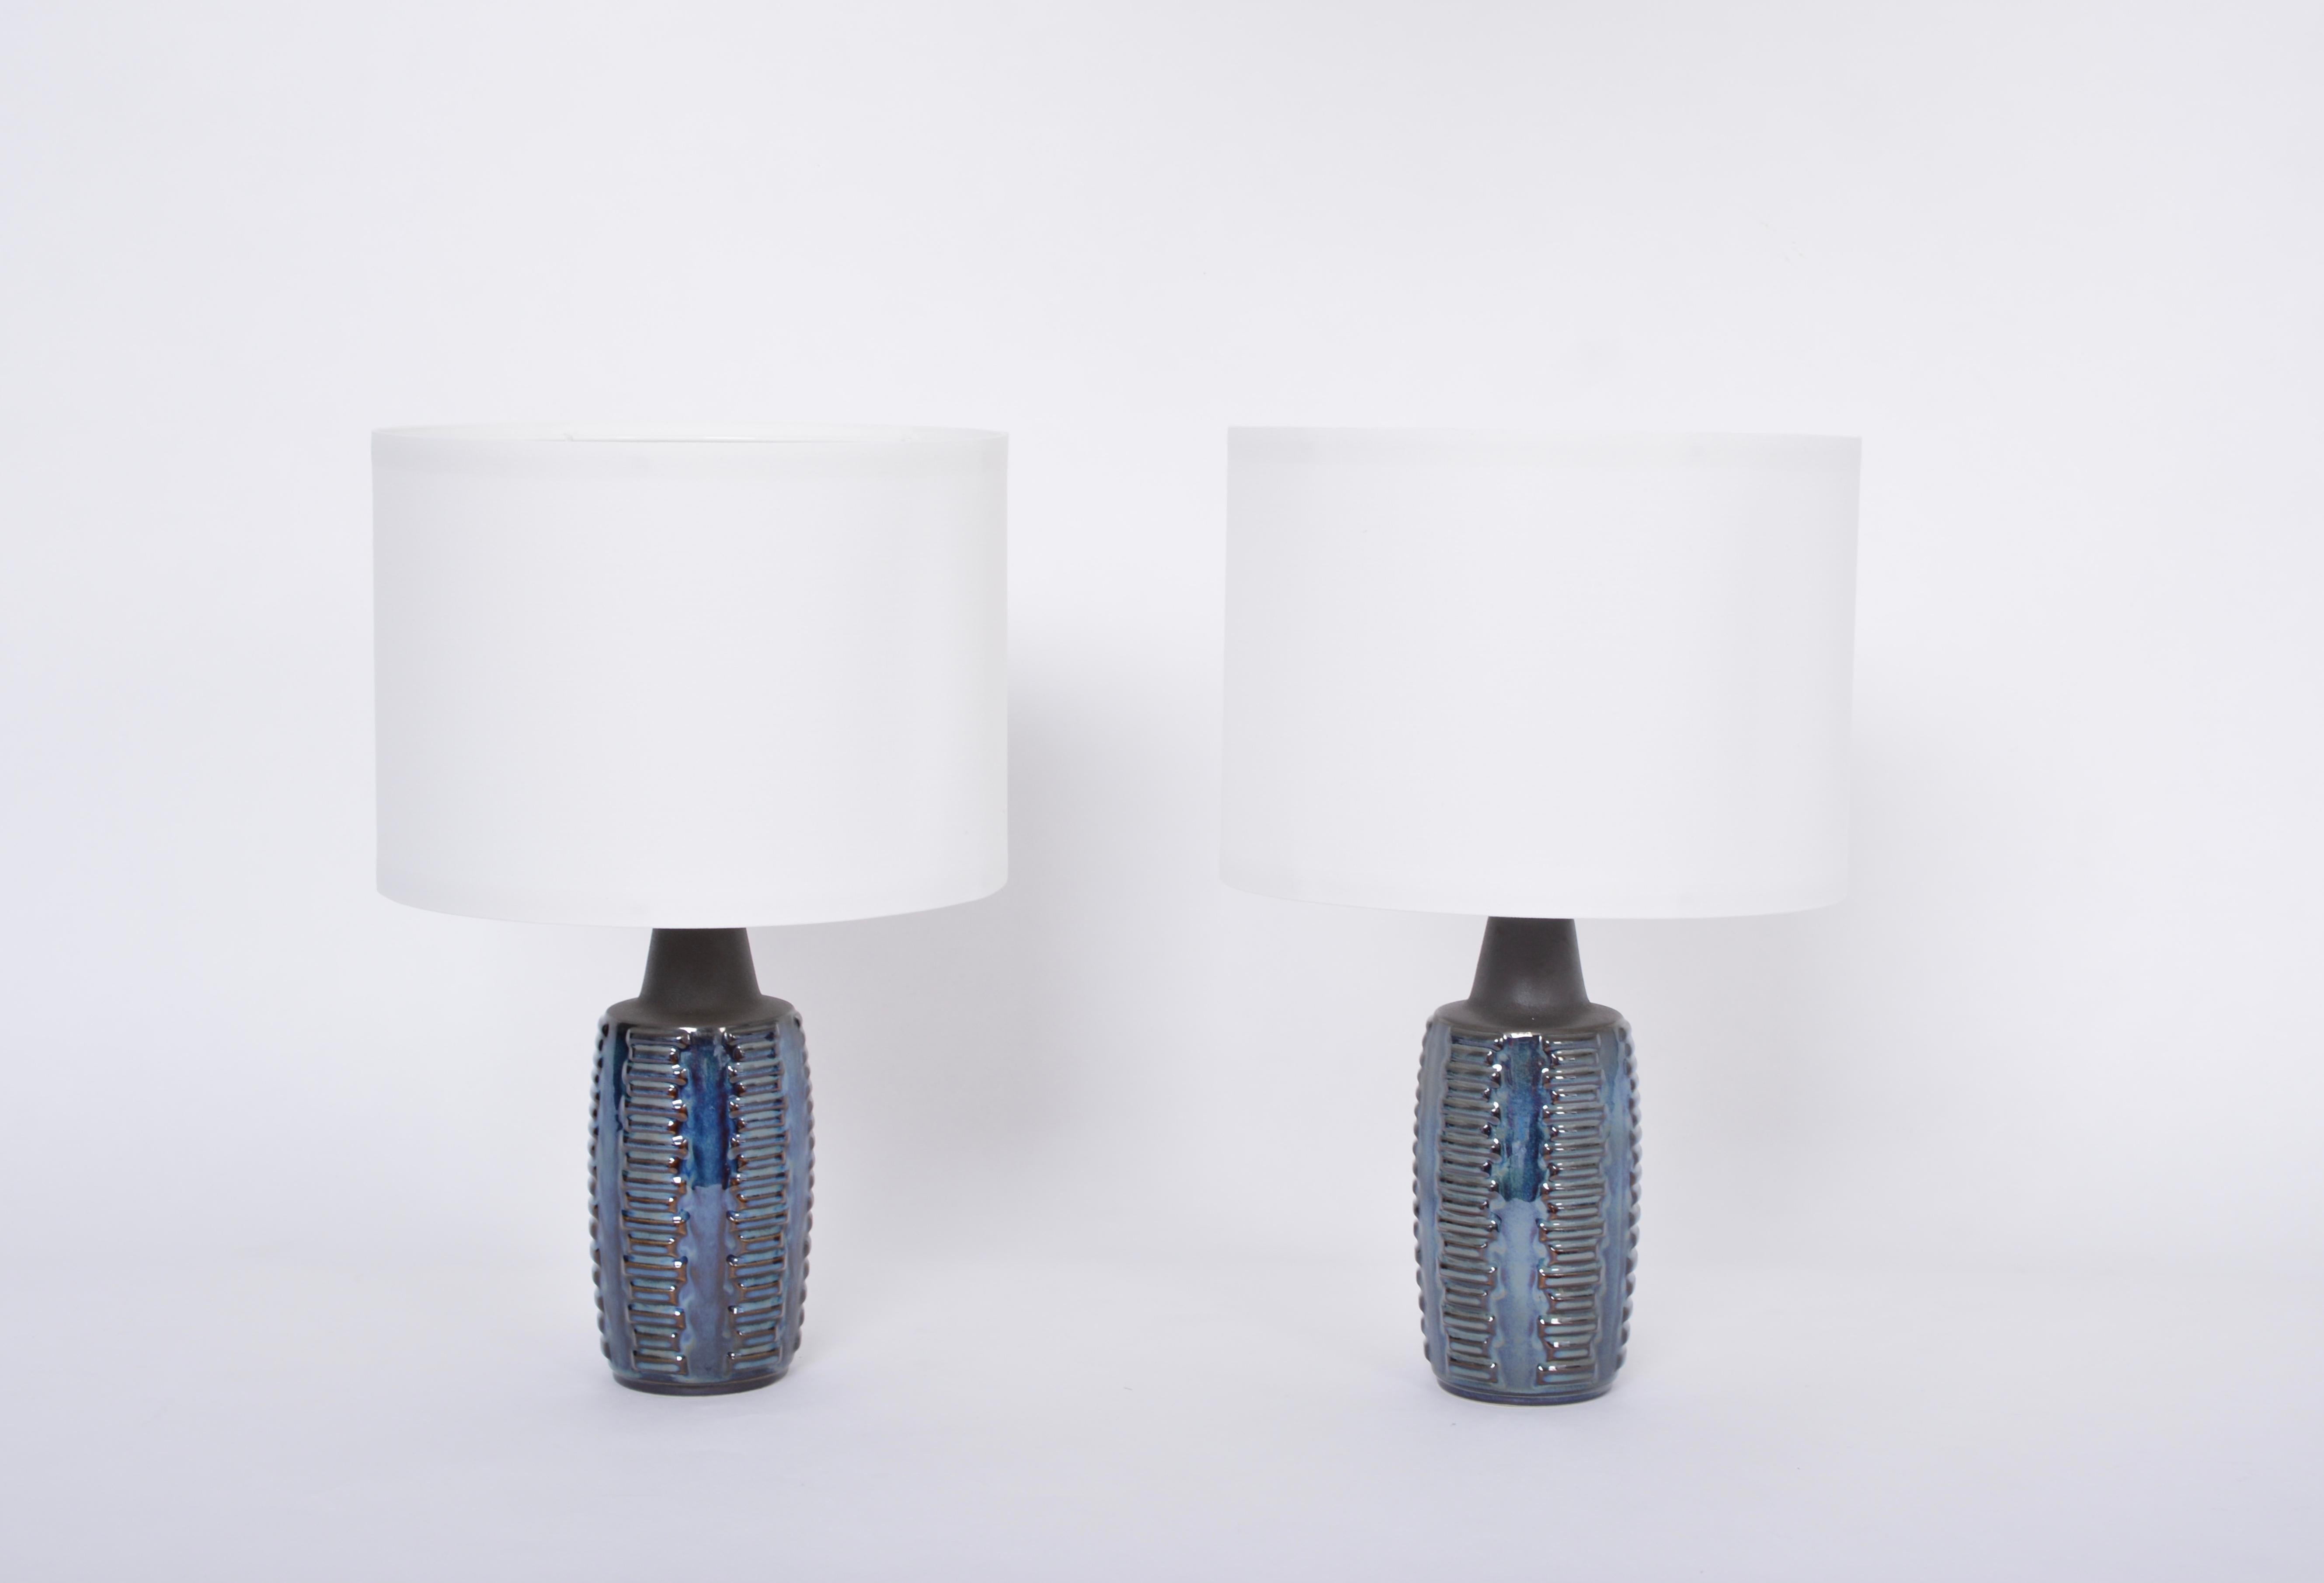 Pair of Blue Midcentury Table Lamps Model 1034 by Einar Johansen for Soholm

Pair of ceramic table lamps designed by Einar Johansen and produced by Danish company Soholm Stentoj probably in the 1960s. The lamp's base are made of stoneware and are